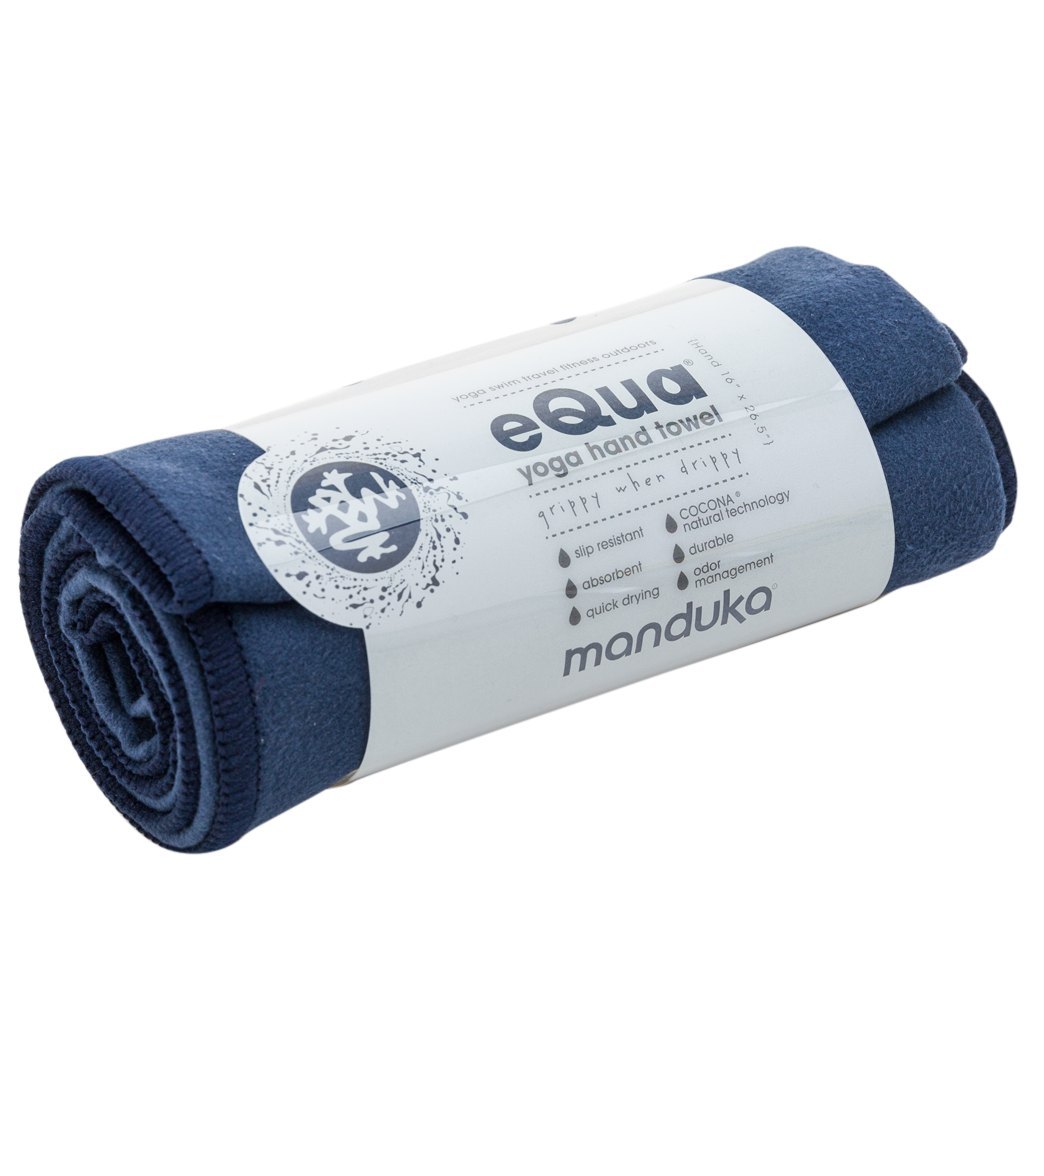 Absorbent and quick drying, the eQua® Hand Yoga Towel is the